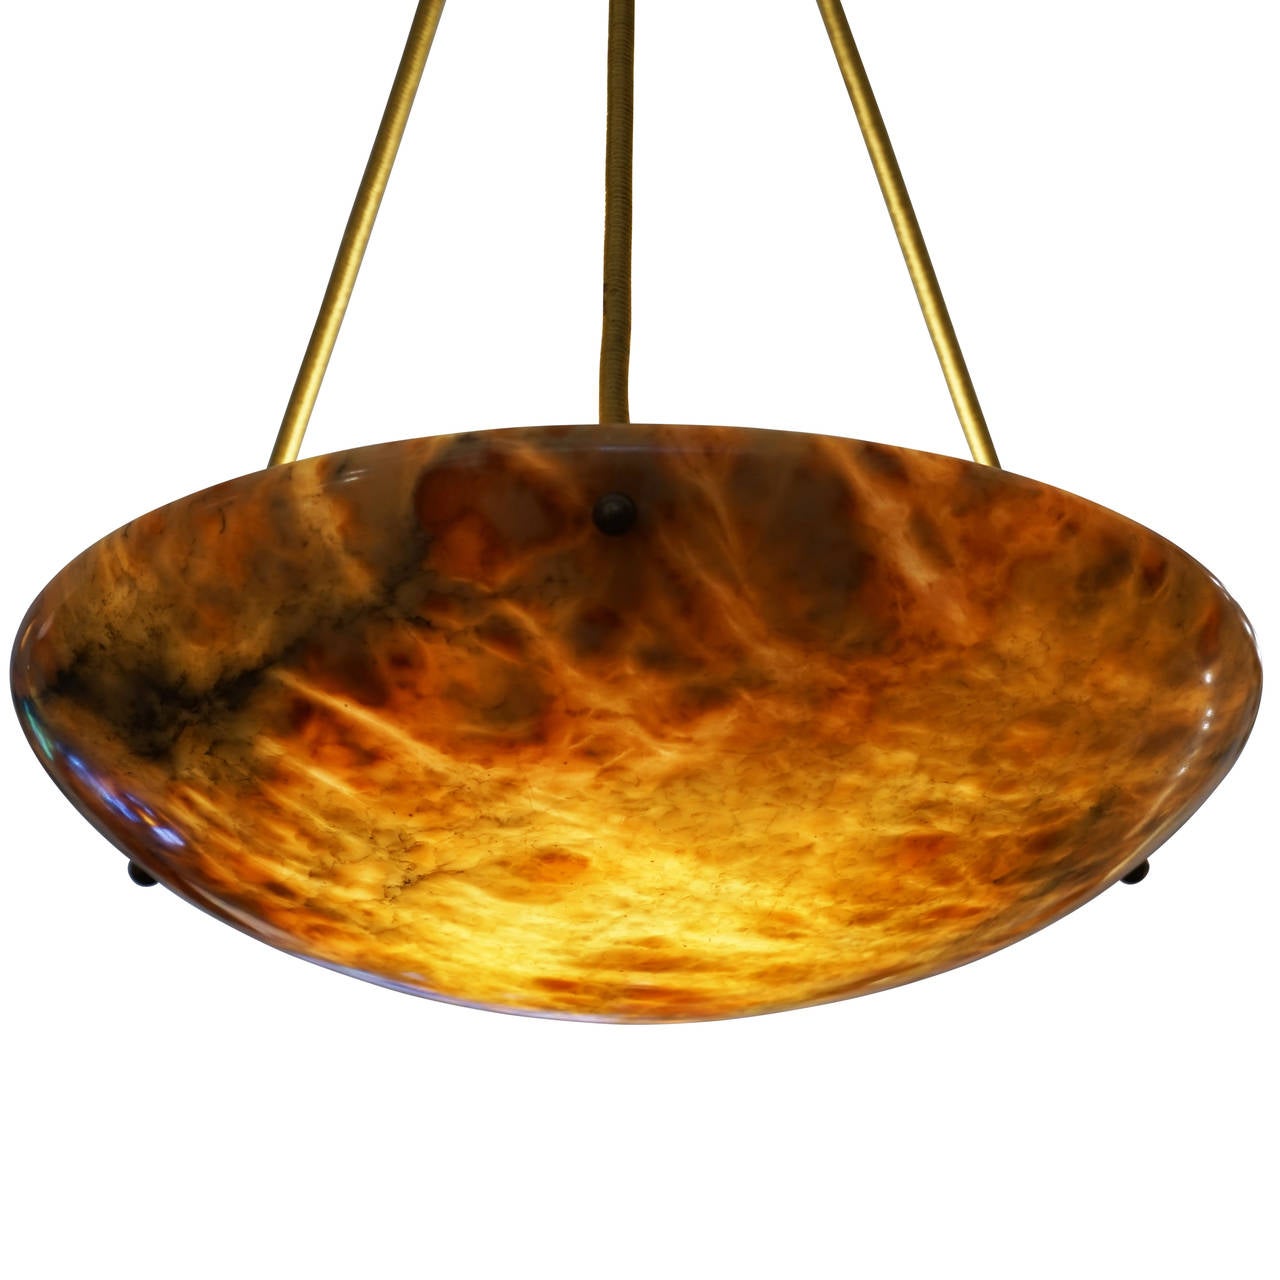 A smooth burning sphere, this fixture is multicolored, with shades of gold, green, dots of amber, fossils, and charcoal mineral veining. Dramatic, yet restrained, by Virtue of its slim profile and medium circumference.